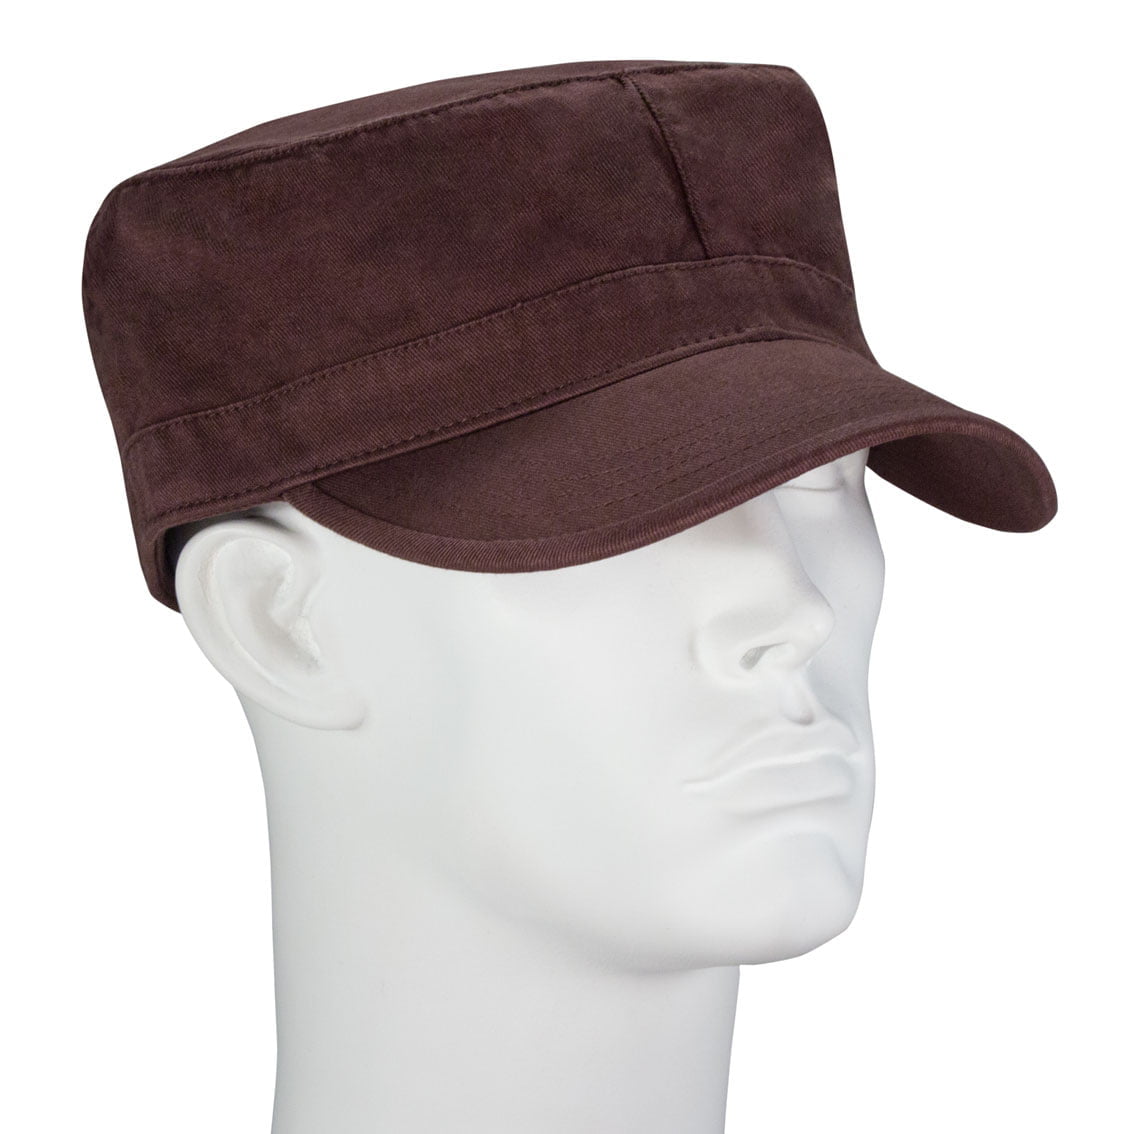 12pcs Brown Solid Castro Military Fatigue Army Hats - Fitted - Unconstructed - 100% Cotton - Bulk by the Dozen - Wholesale